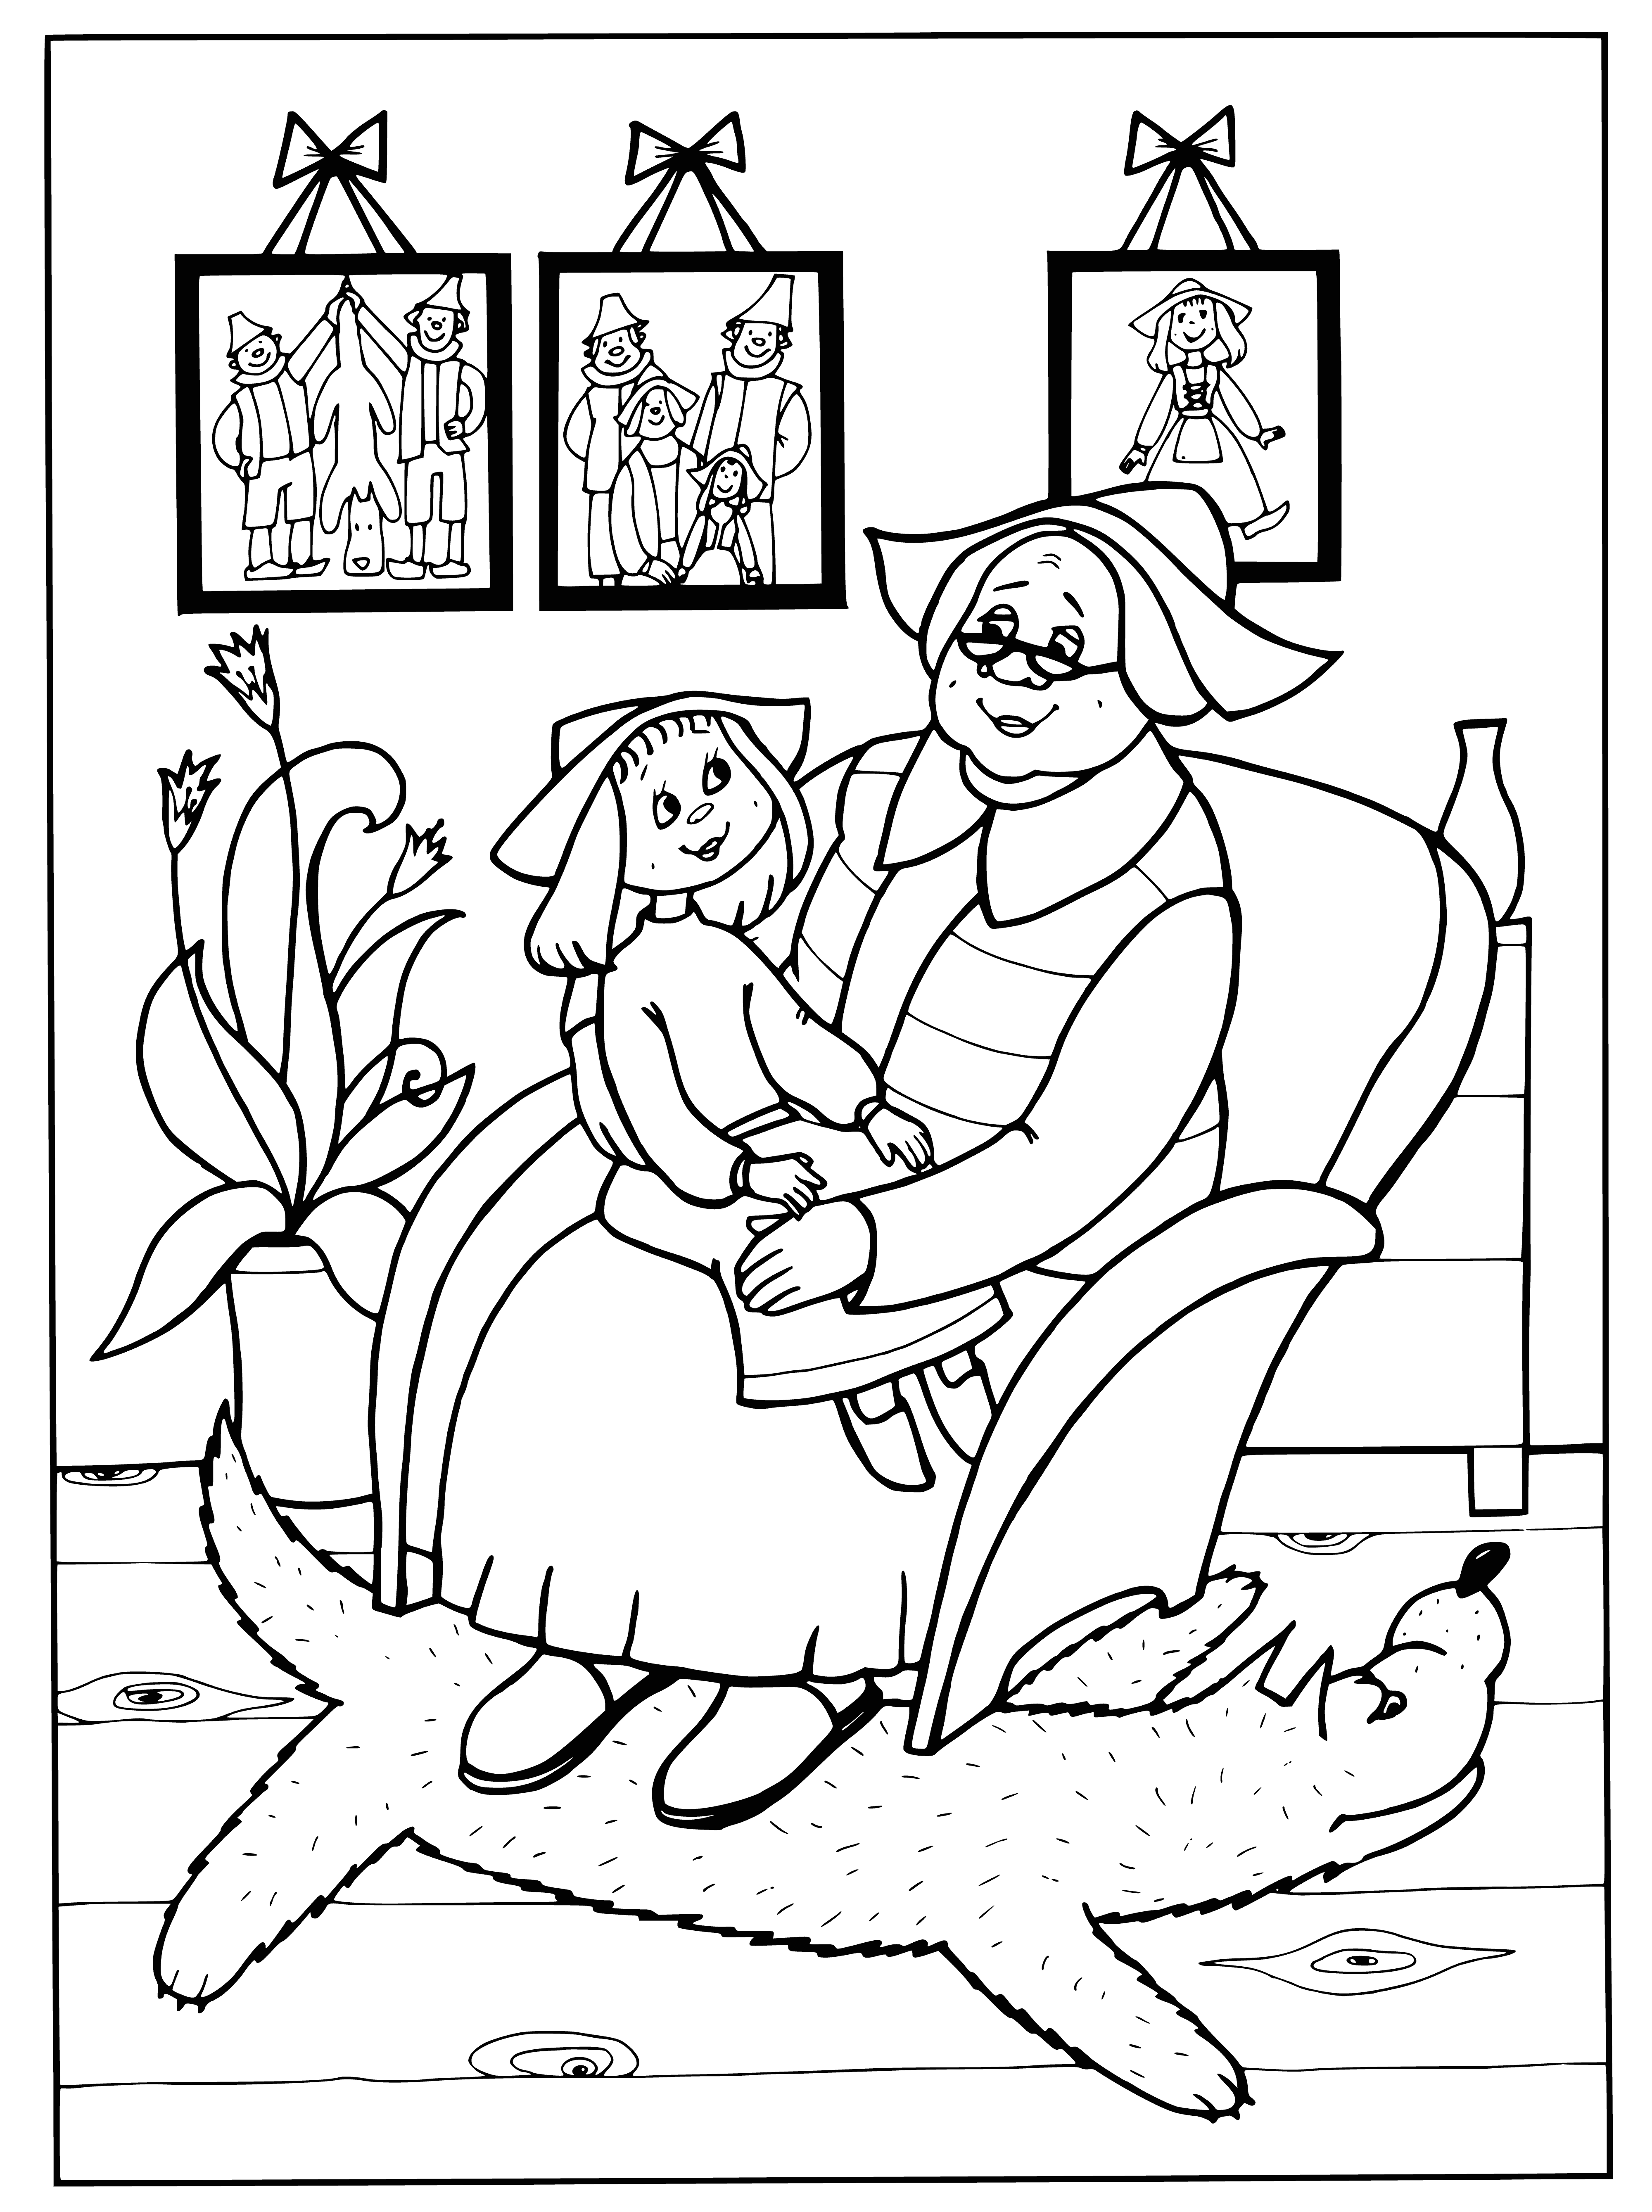 coloring page: Young girl tells animals a story in a peaceful field, creating warm, content atmosphere. Animals seem interested & happy.